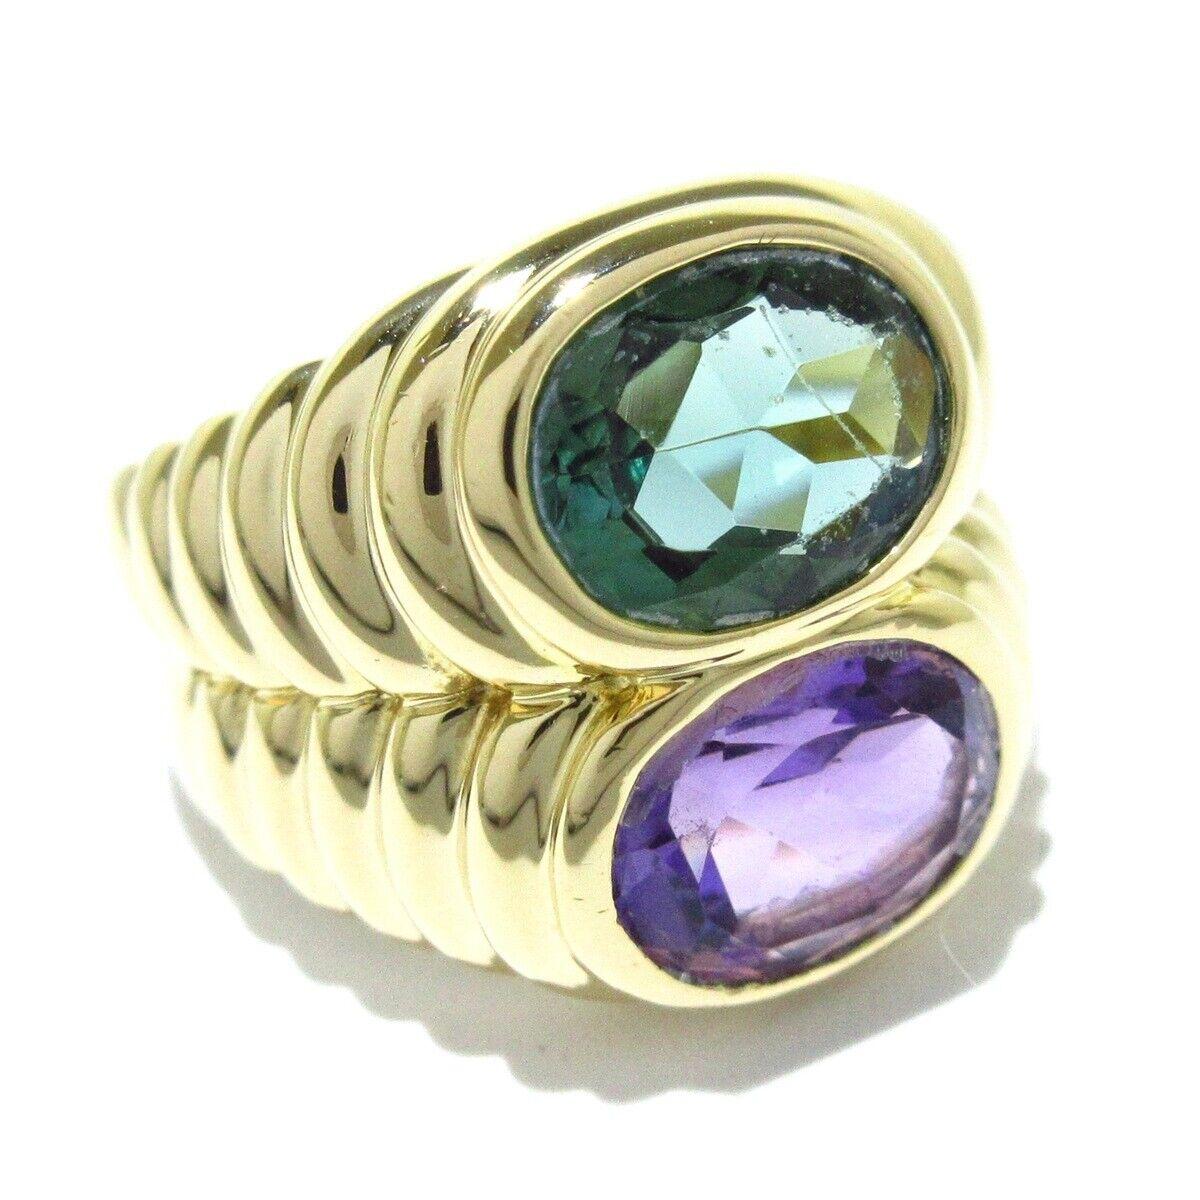 Bvlgari Italy Doppio 18k Yellow Gold, Amethyst & Green Tourmaline Ring Vintage

Here is your chance to purchase a beautiful and highly collectible designer ring.  Truly a great piece at a great price! 

The ring size is between 5.75 and 6.  
The